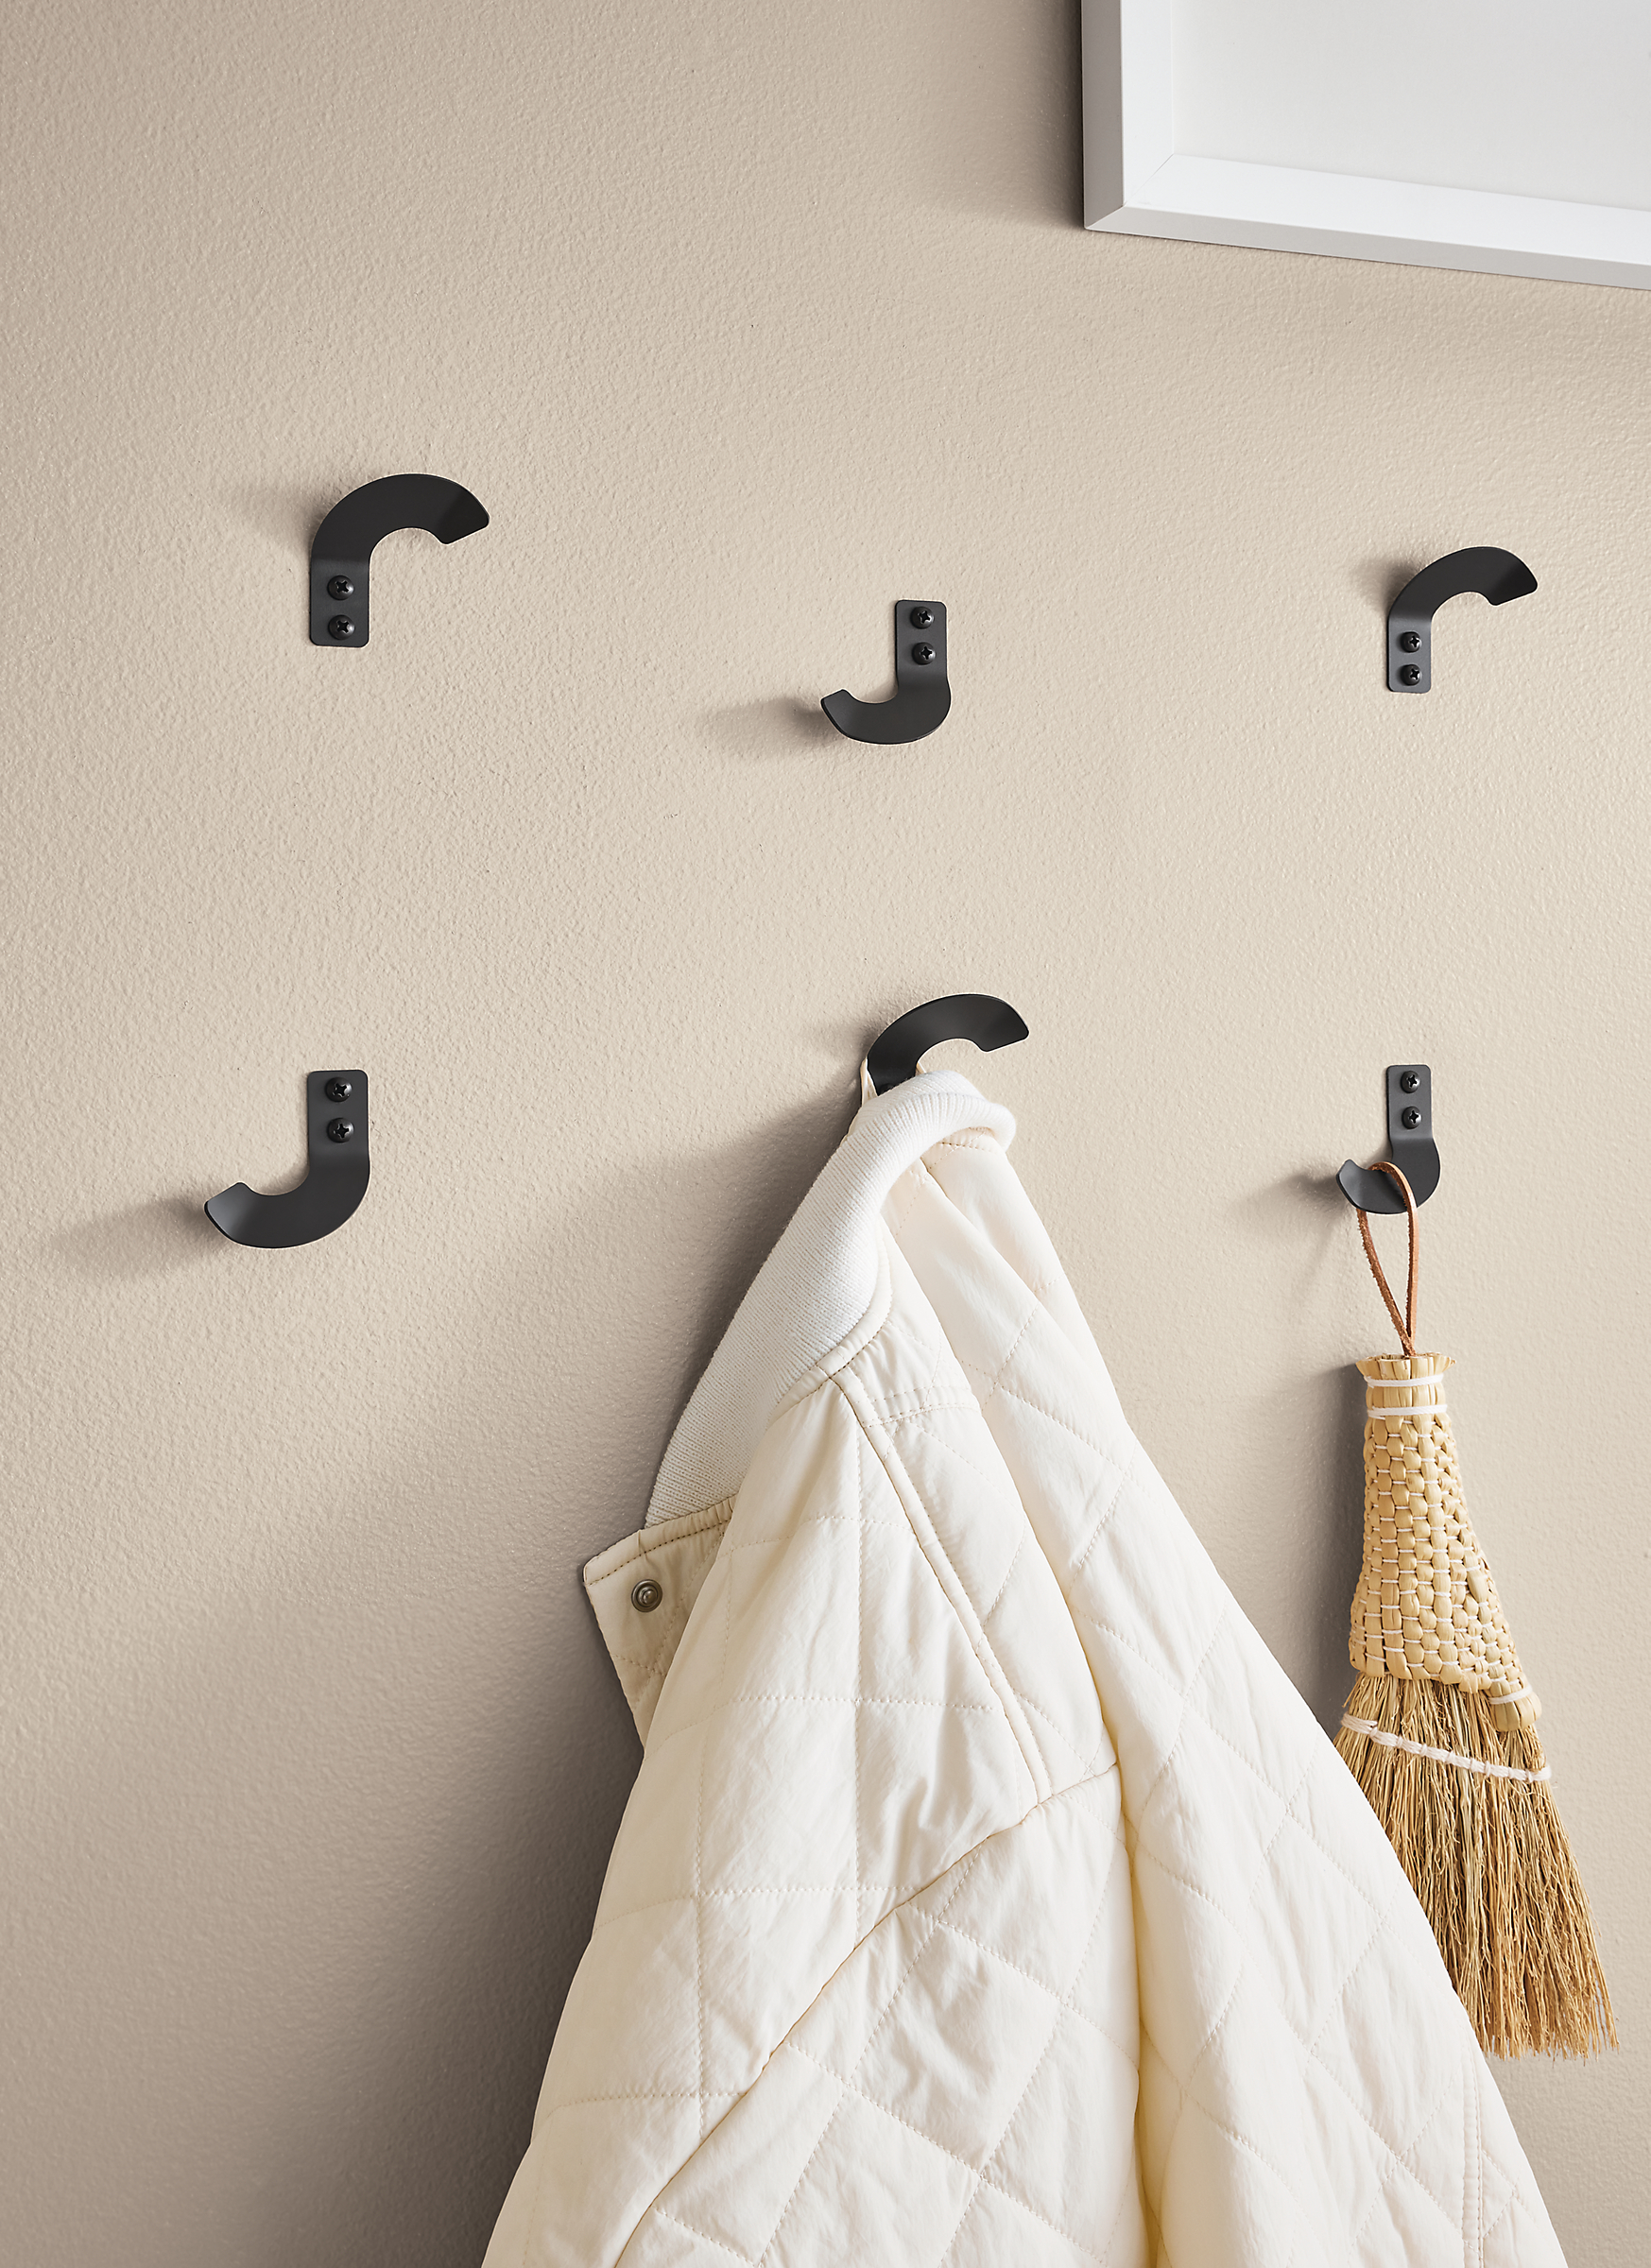 Six Whim wall hooks arranged in eclectic pattern on entryway wall.